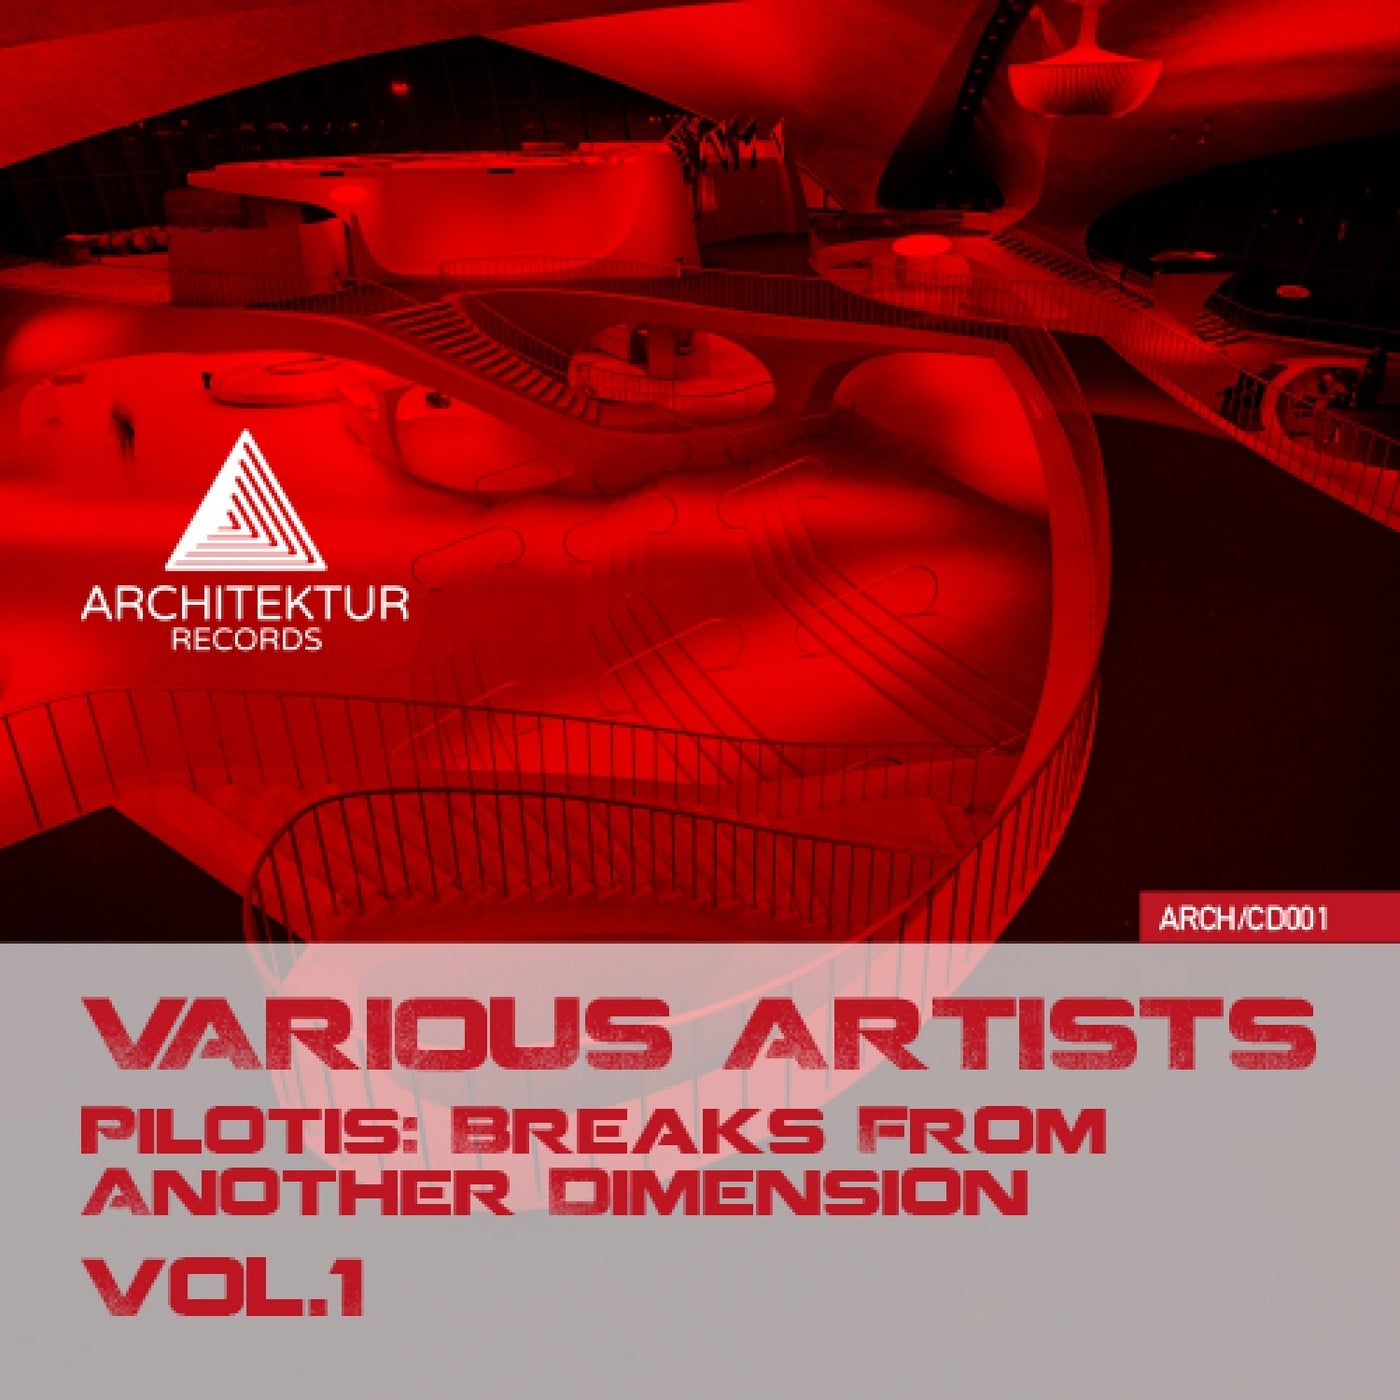 Pilotis: Breaks From Another Dimension Vol.1